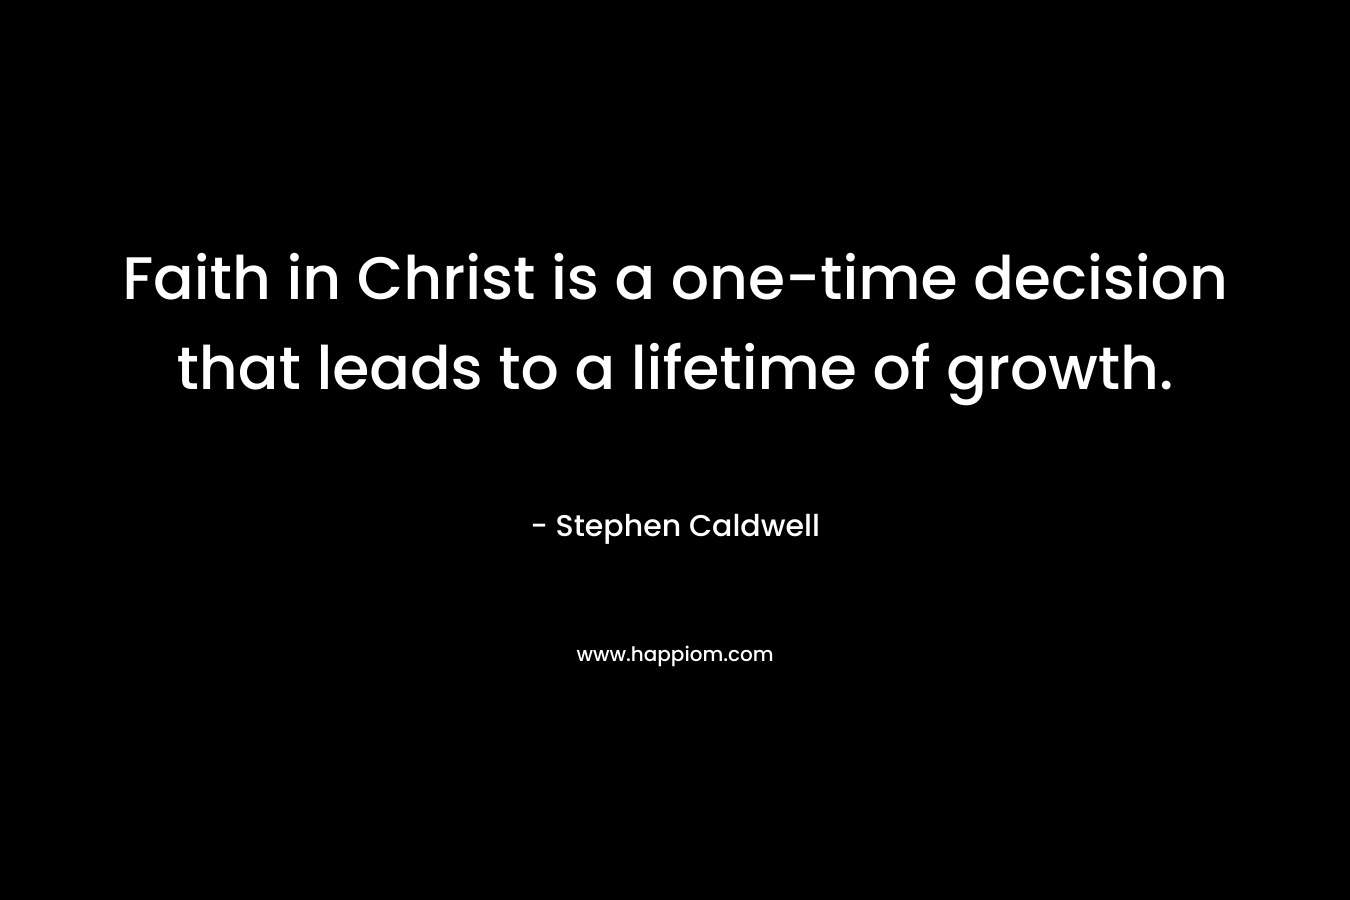 Faith in Christ is a one-time decision that leads to a lifetime of growth. – Stephen Caldwell